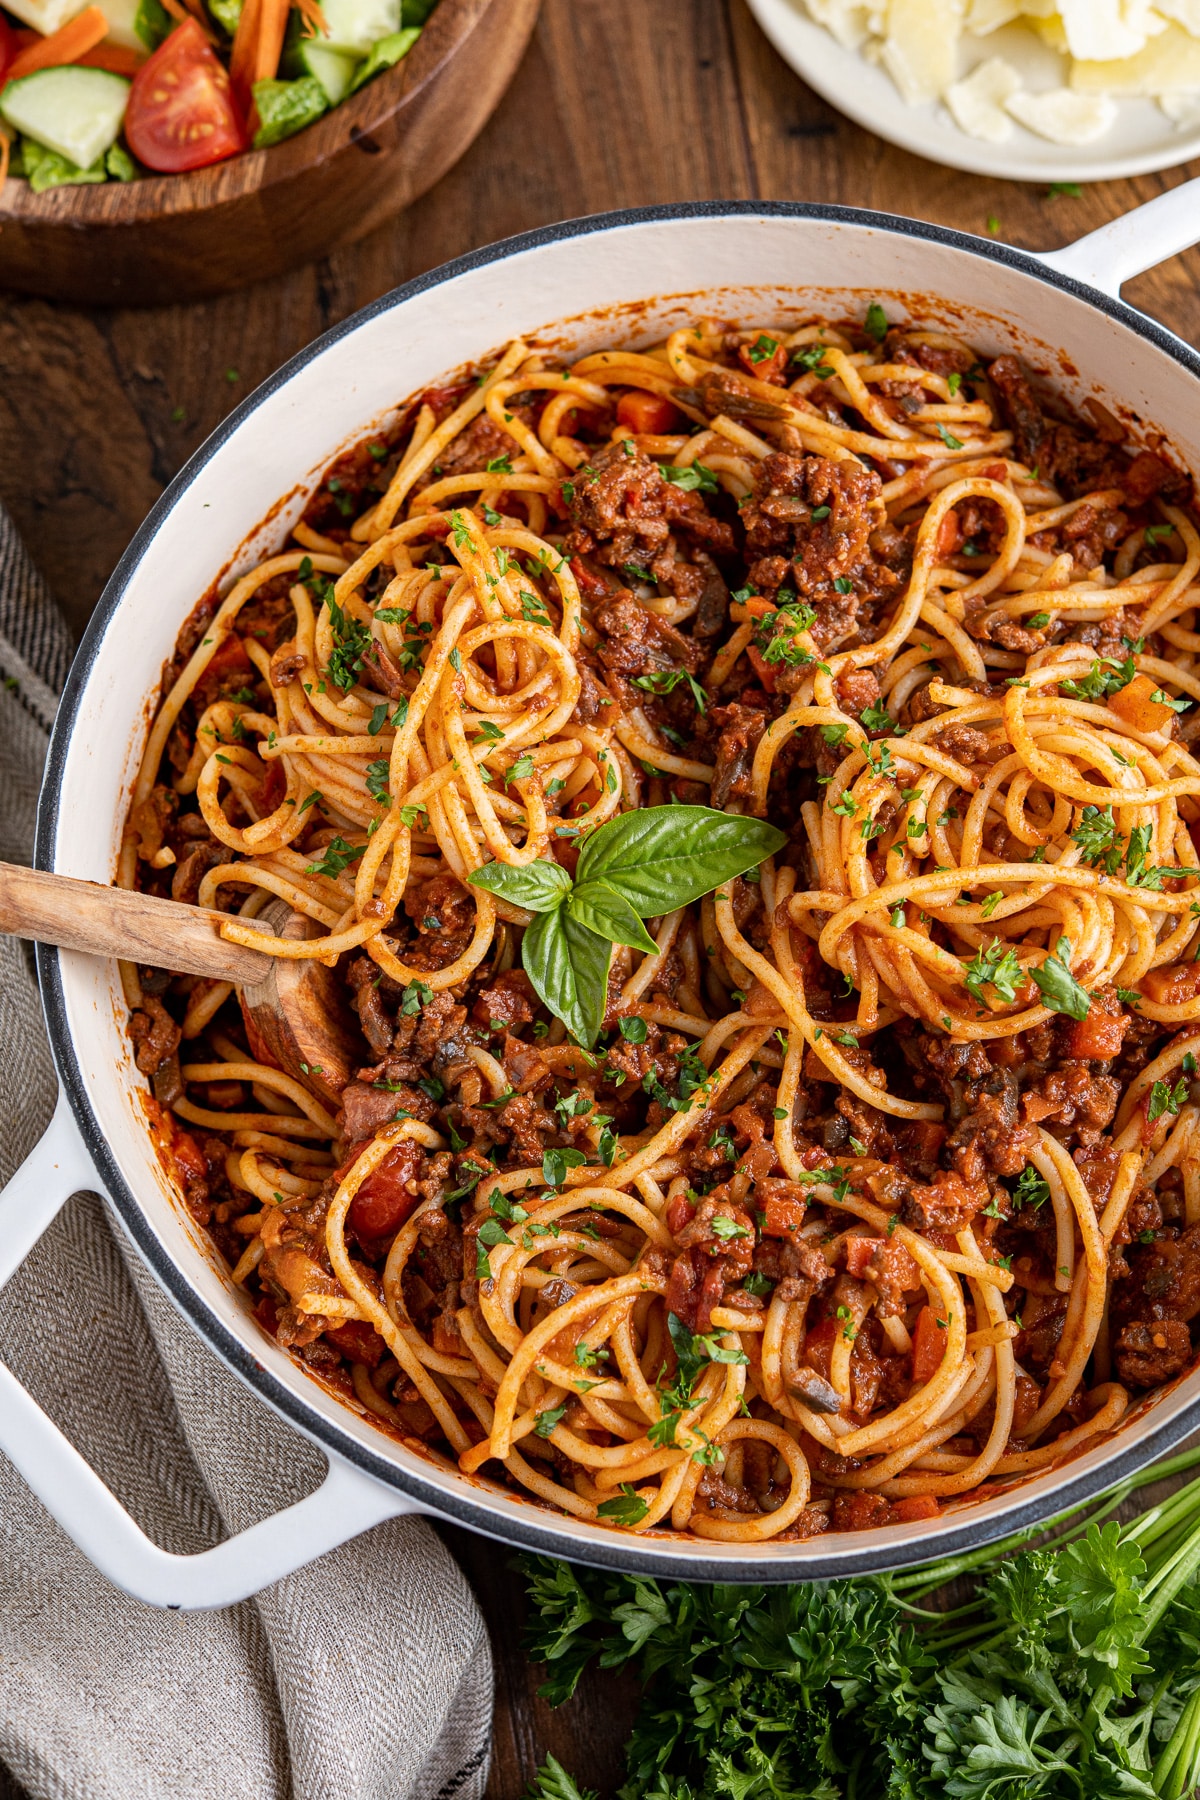 Beef Bolognese